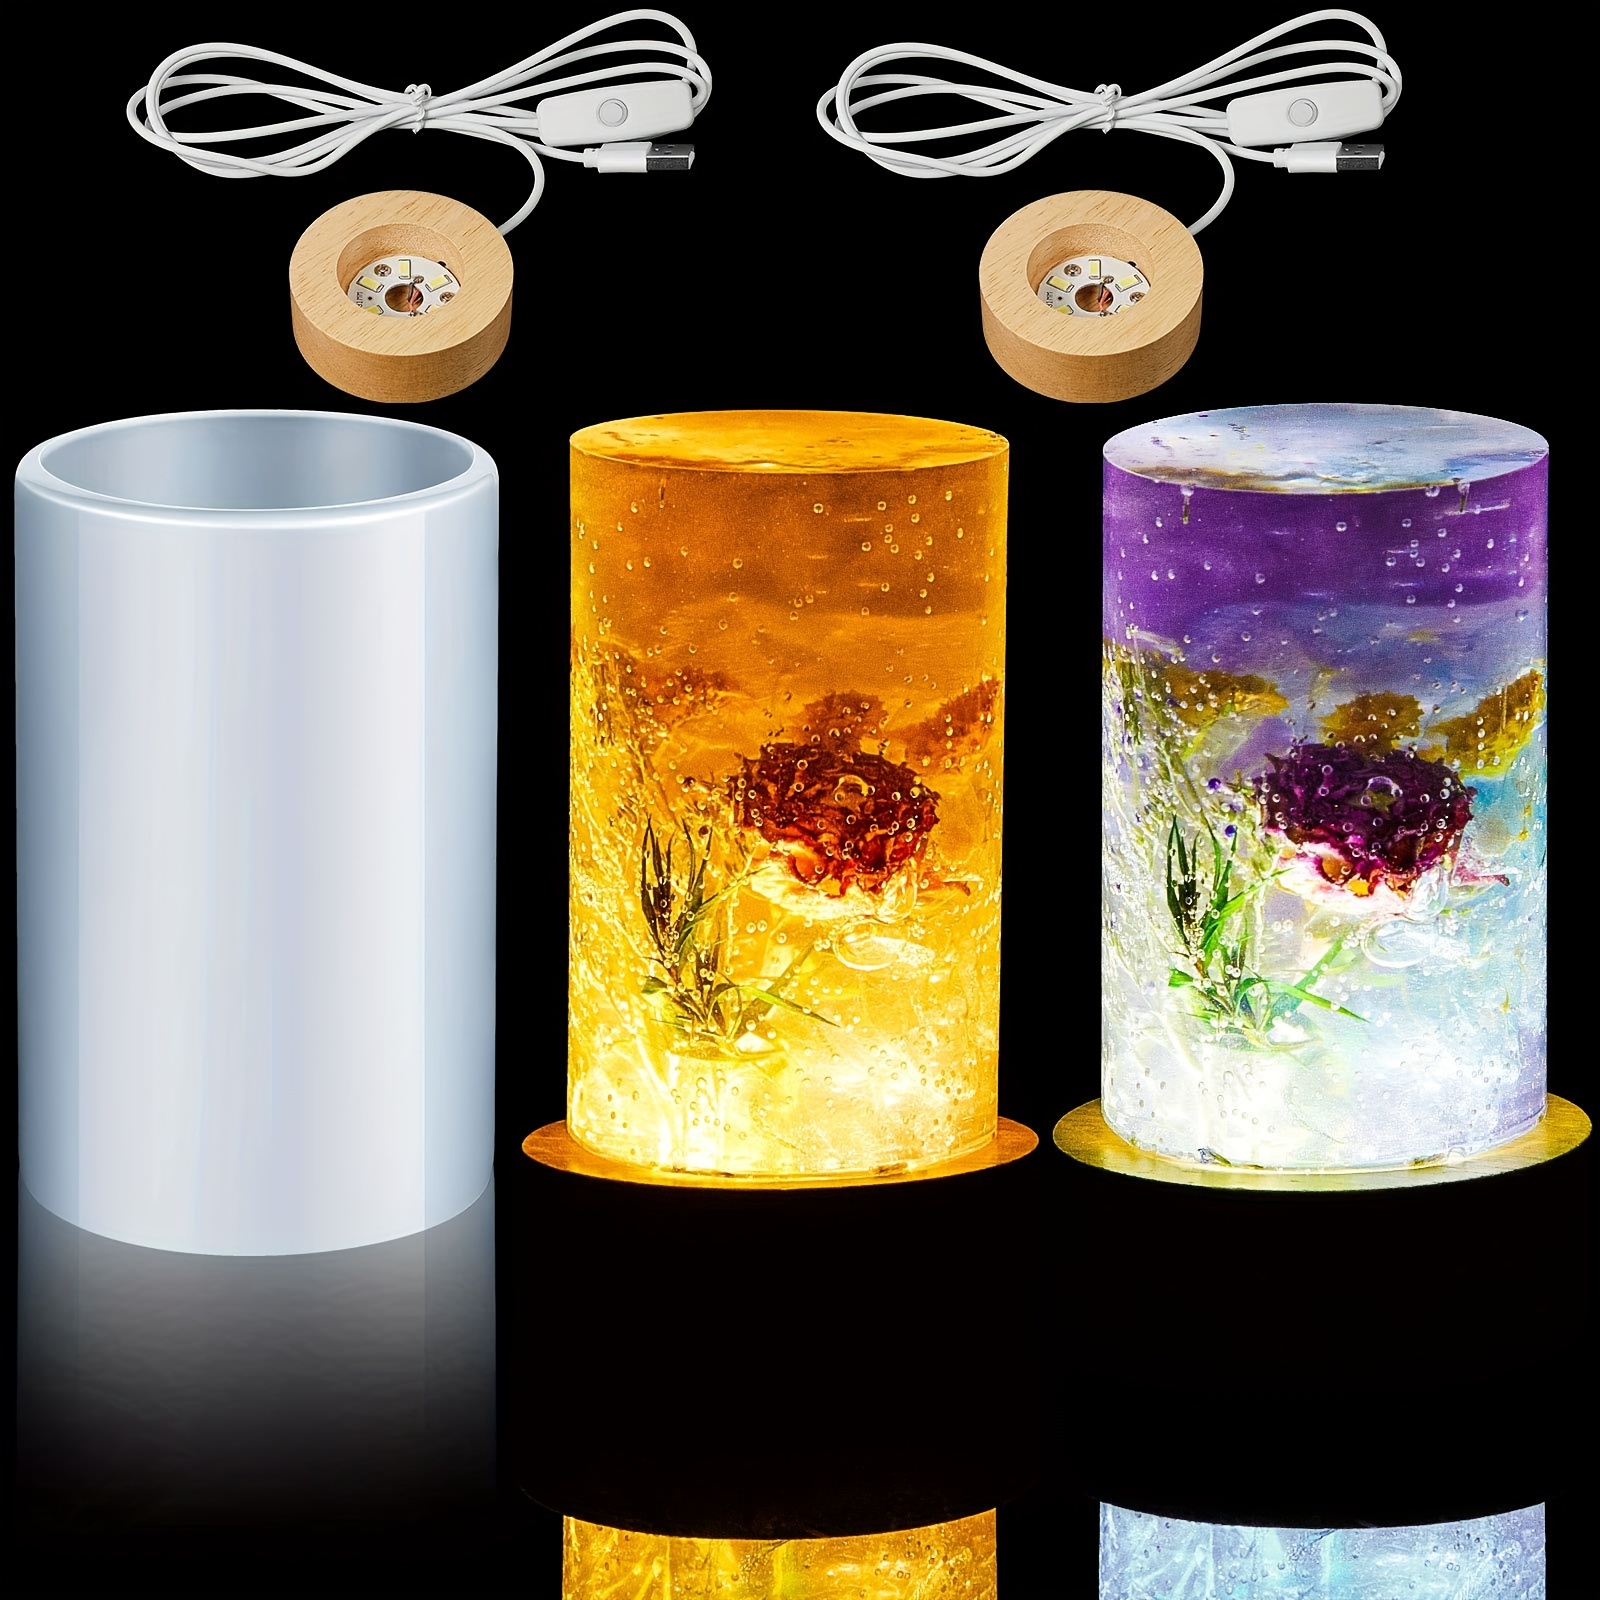 

3pcs Resin Cylindrical Lamp Making Set, Includes Cylindrical Lamp Silicone Mold And Usb Powered Wood Lamp Base Holder Diy Desktop Ornament Table Candle Home Decoration